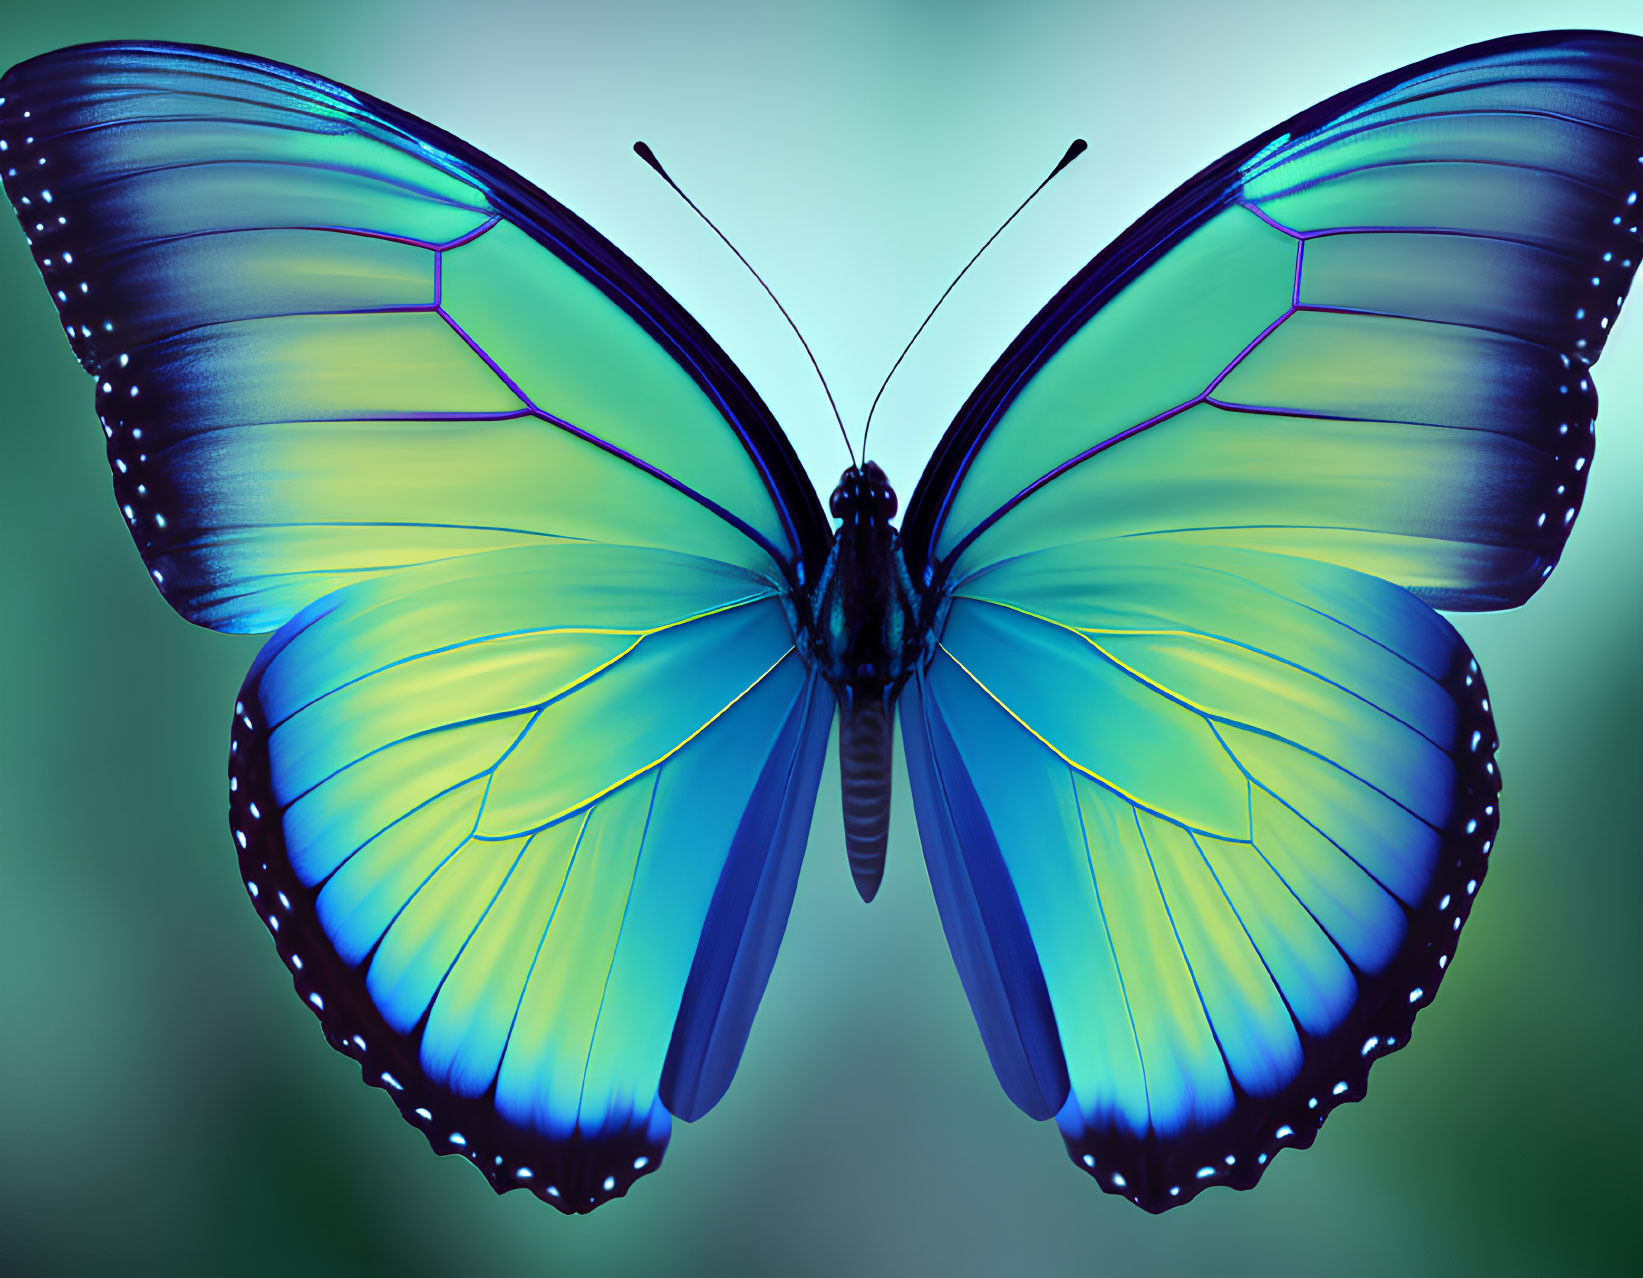 Vivid Blue Butterfly with Translucent Wings on Soft Green Background